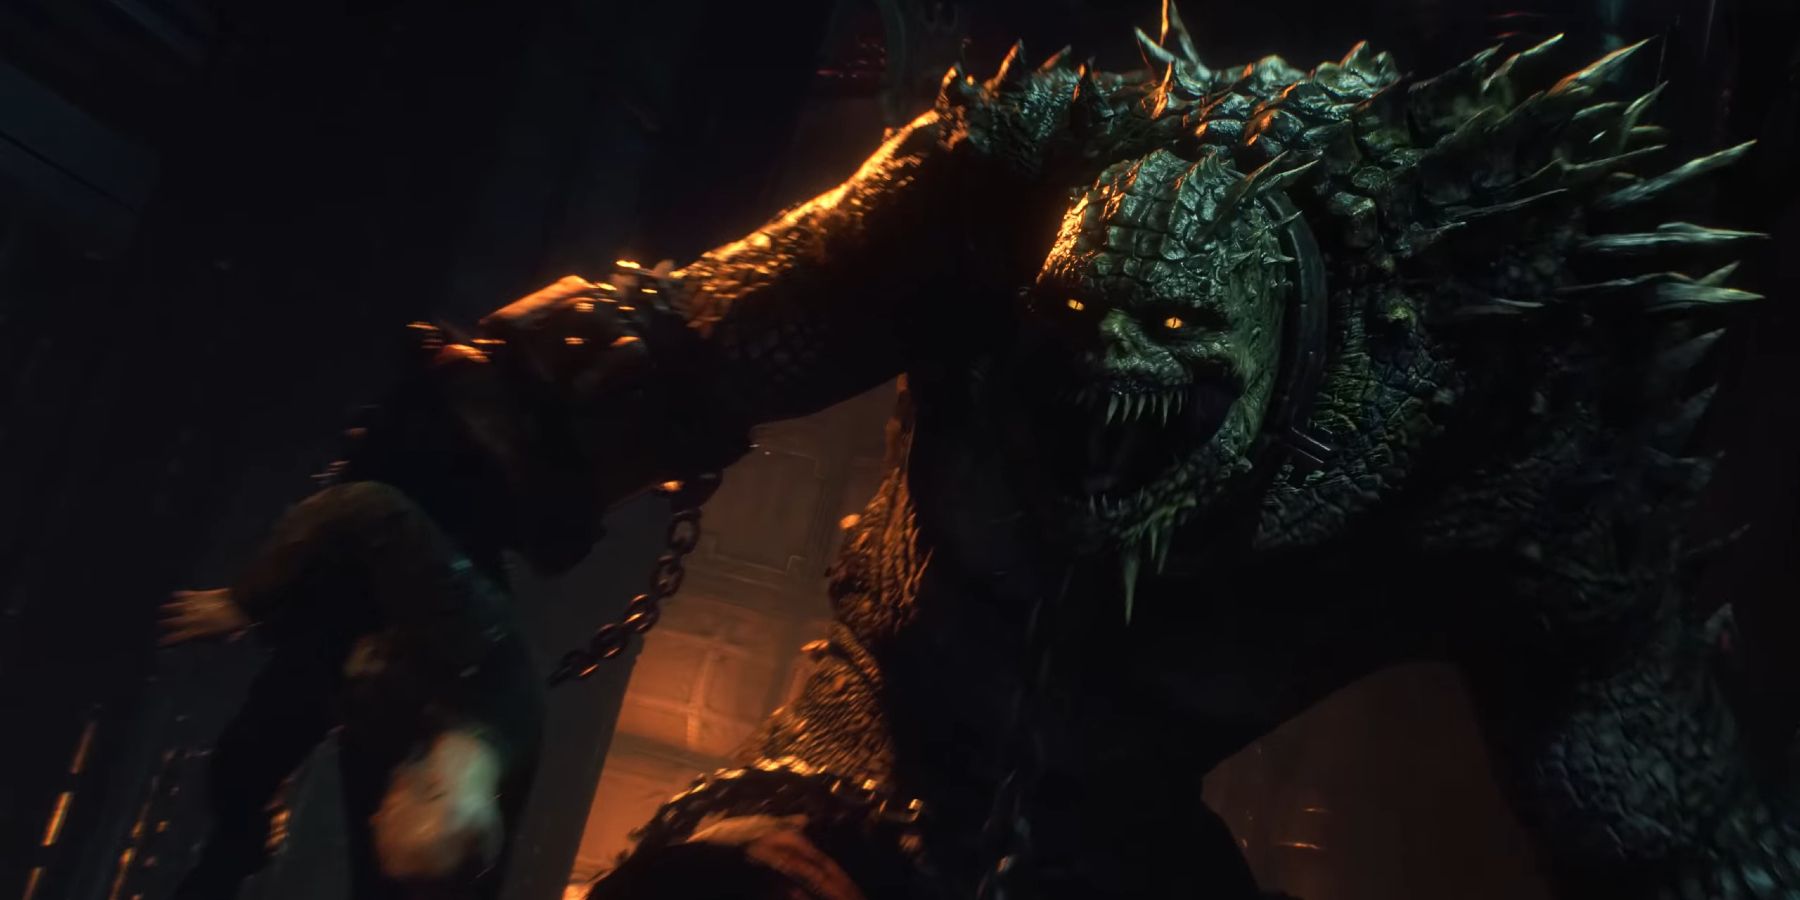 Killer Croc roaring while kidnapping the warden in Batman Arkham Knight